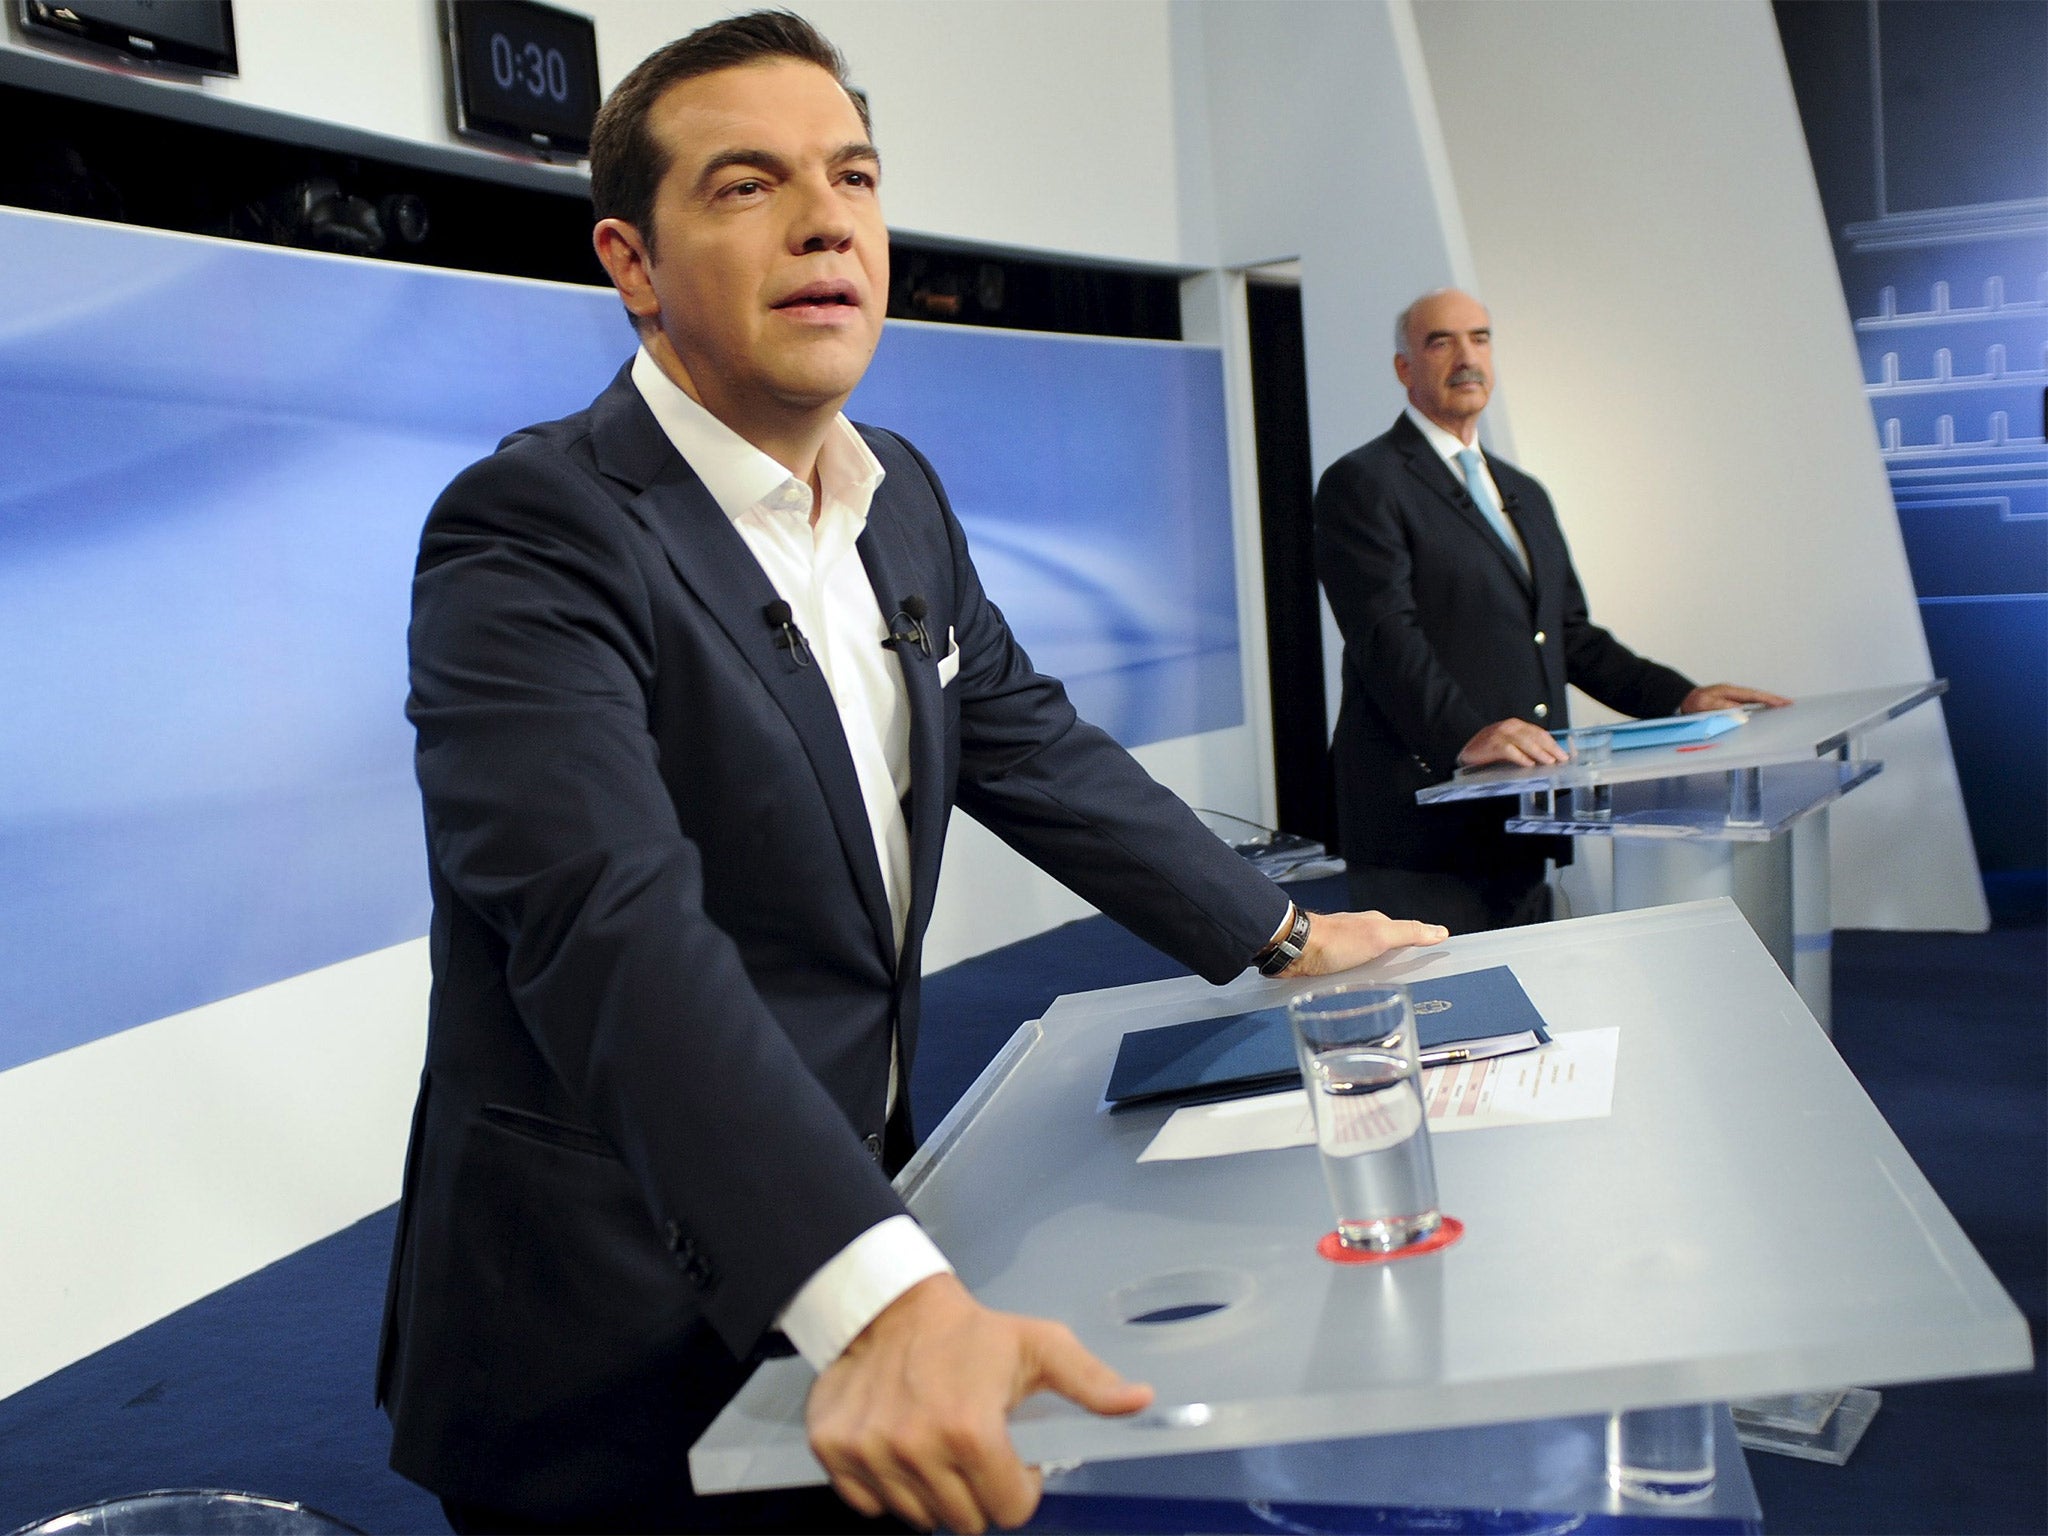 Syriza party leader Alexis Tsipras and New Democracy party leader Vangelis Meimarakis stand at their podiums during the televised debate in Athens